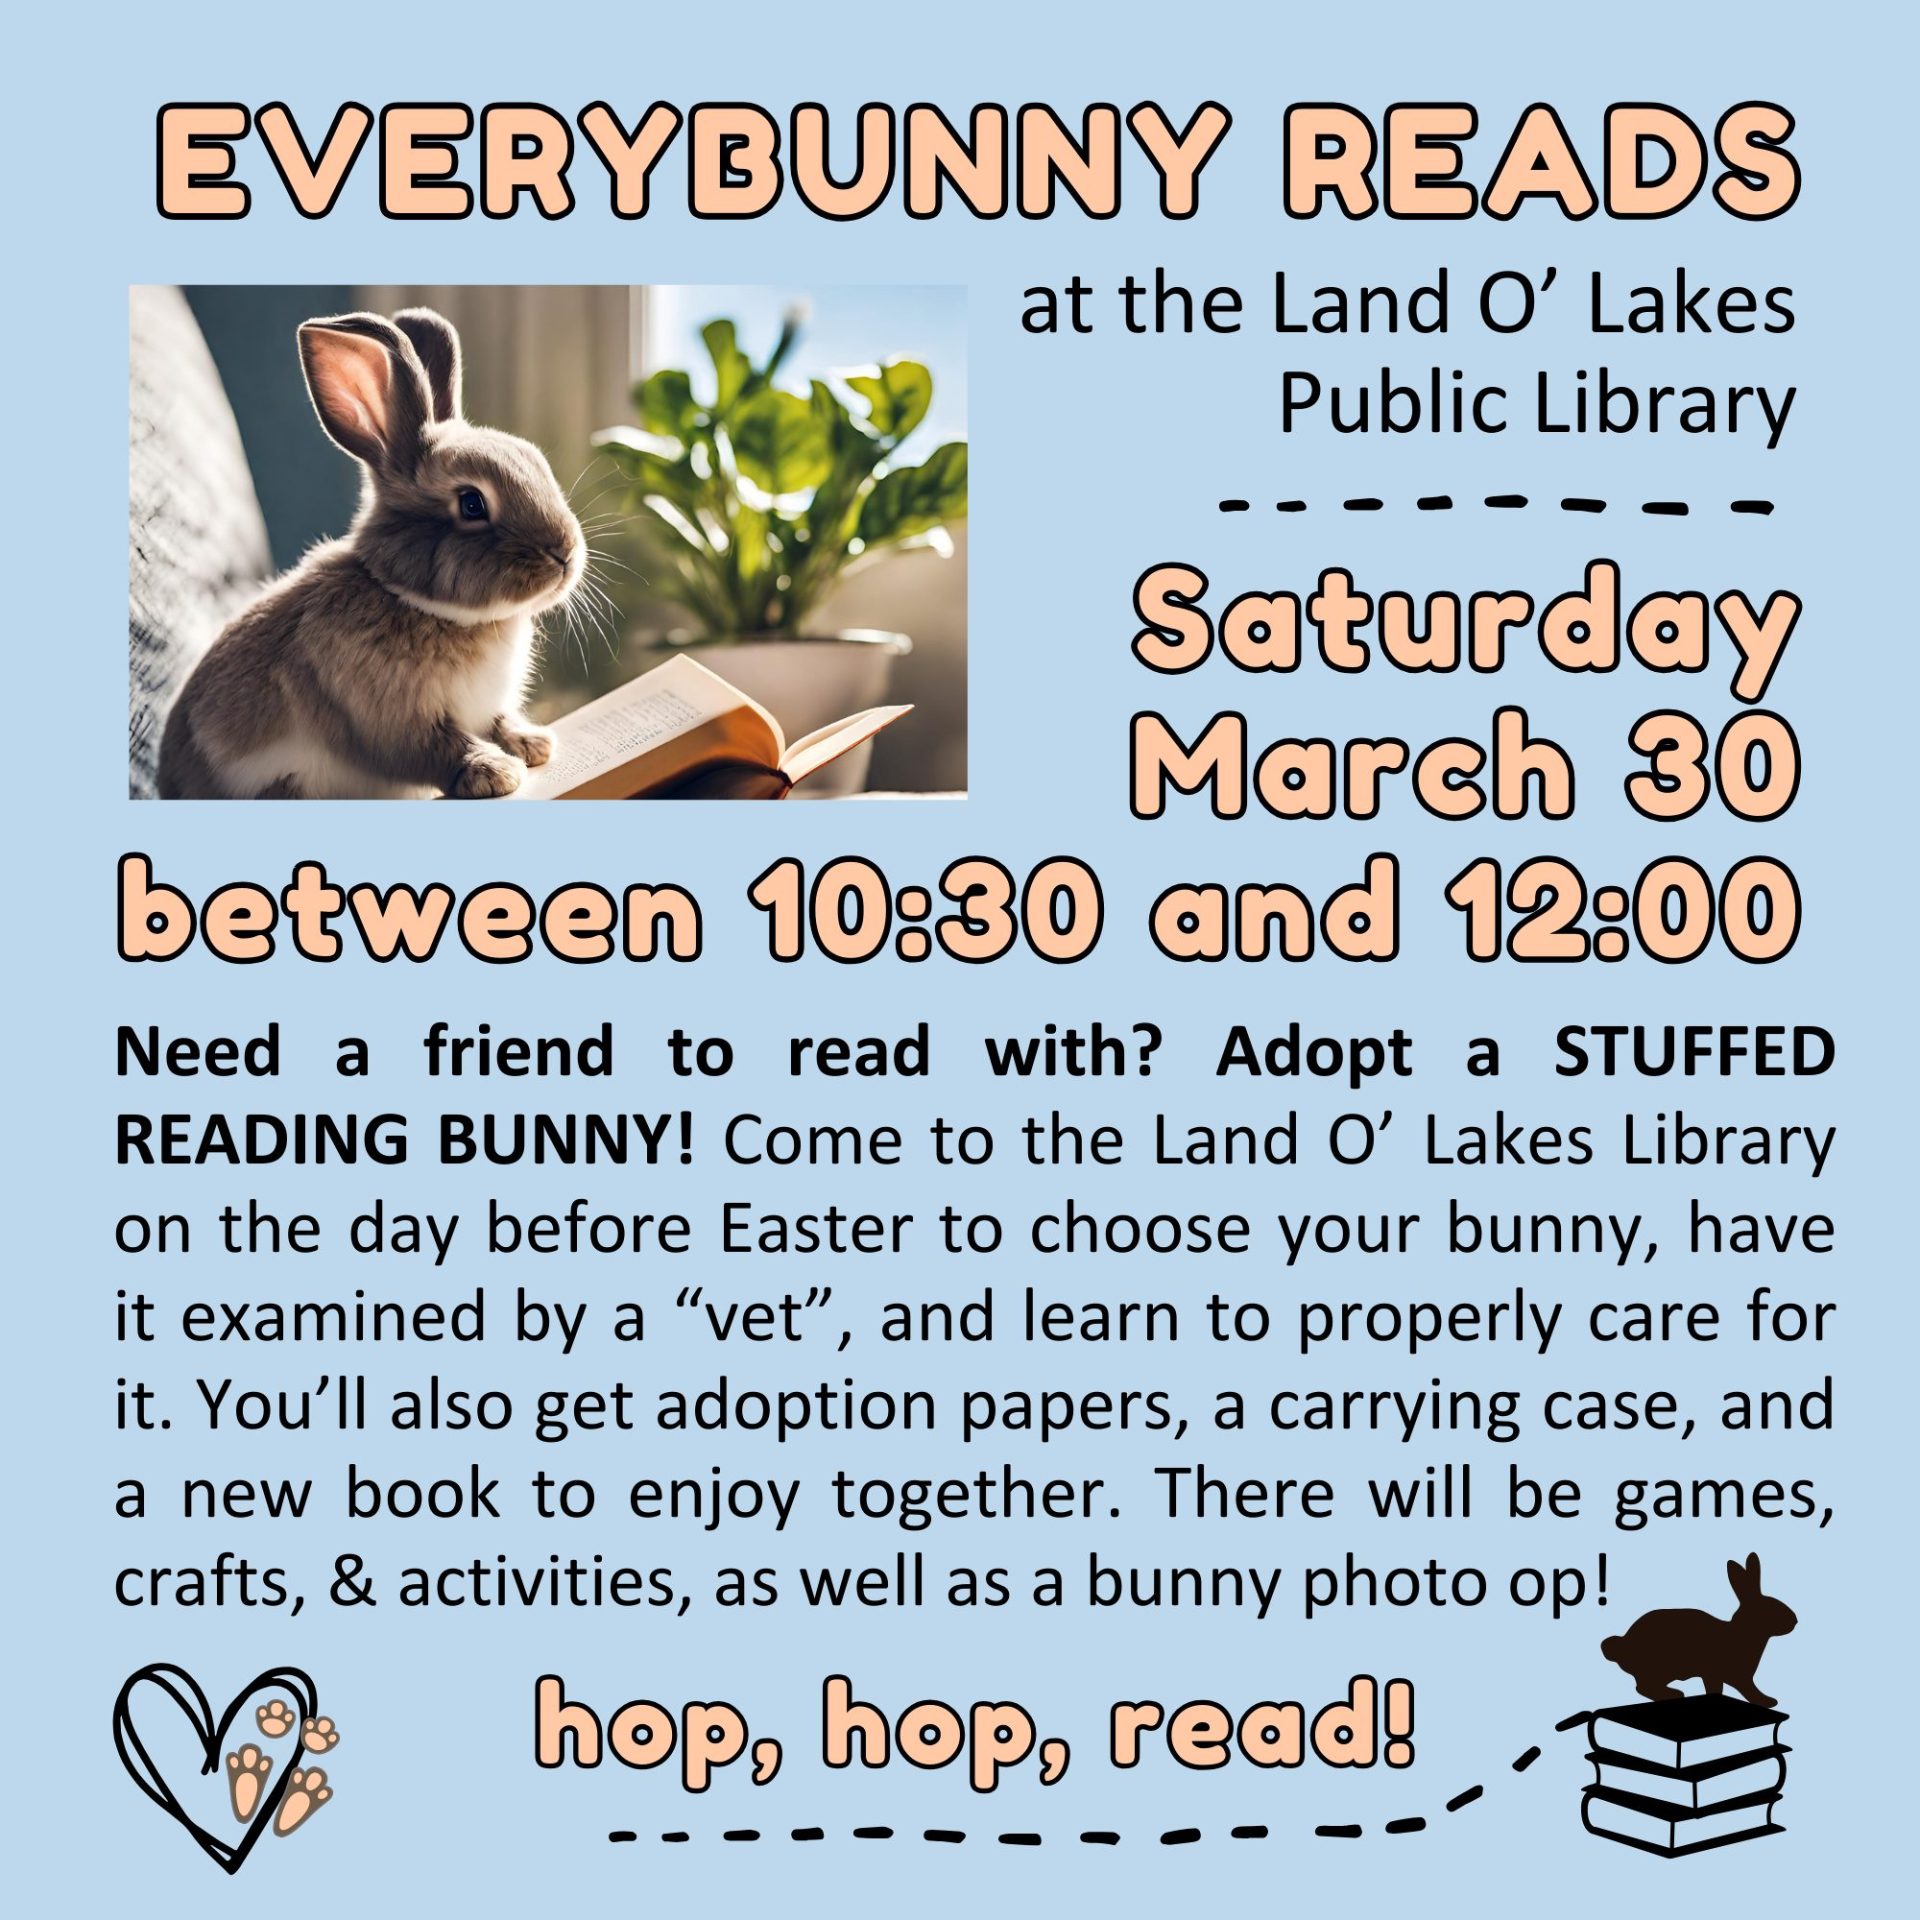 Everybunny Reads